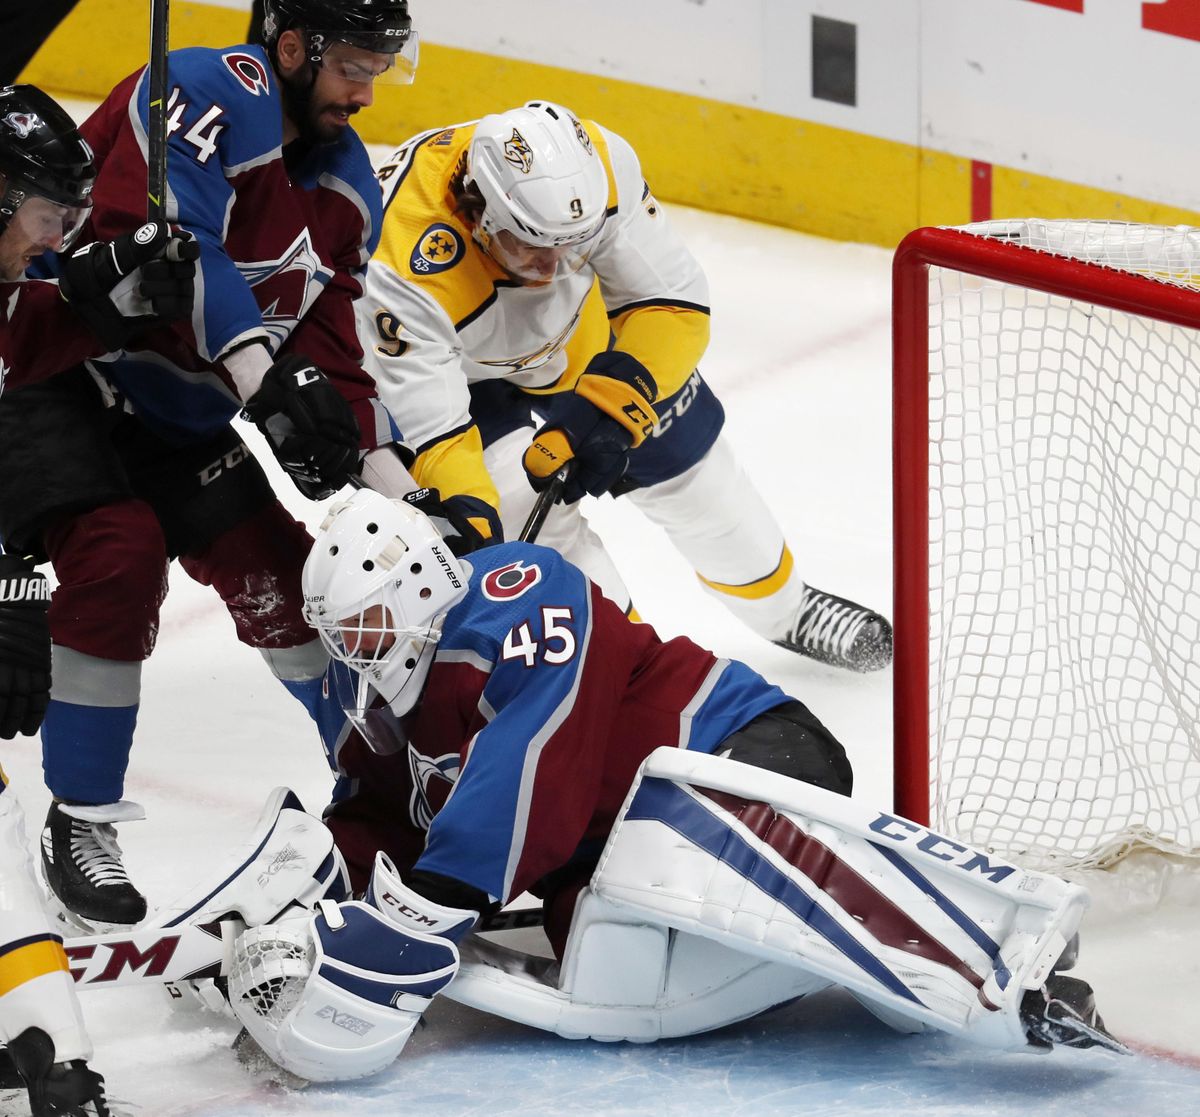 Colorado Avalanche goaltender Jonathan Bernier, front, falls on the ice to stop a shot by Nashville Predators left wing Filip Forsberg, back right, as Colorado defenseman Mark Barberio fights for position during the first period of Game 4 of an NHL hockey first-round playoff series Wednesday, April 18, 2018, in Denver. (David Zalubowski / Associated Press)